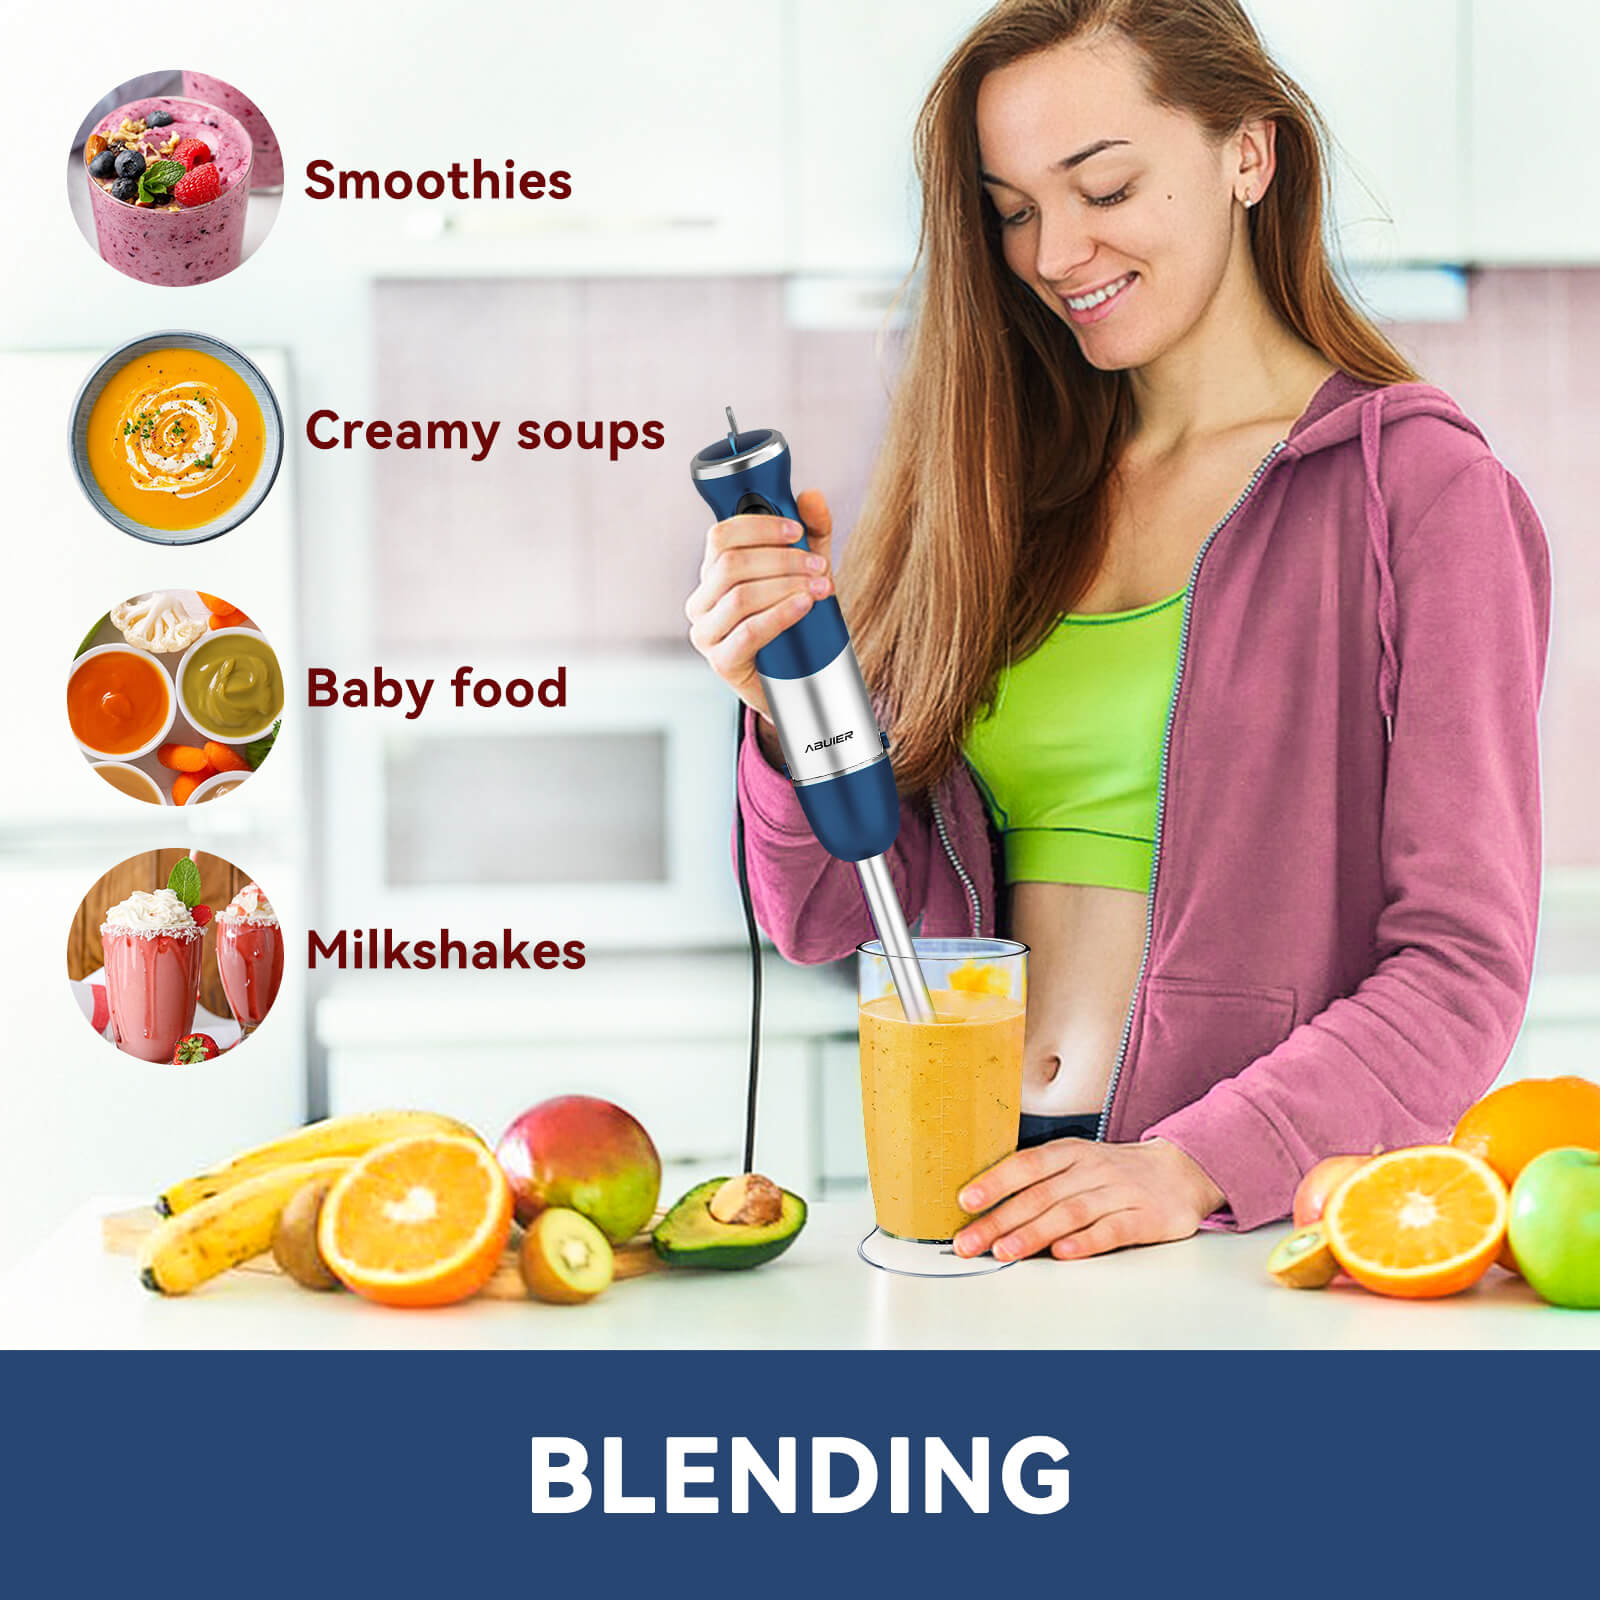 Handheld Blender, Electric Hand Blender, Immersion Blender Portable Stick  Mixer With Stainless Steel Blades For Soup, Smoothie, Puree